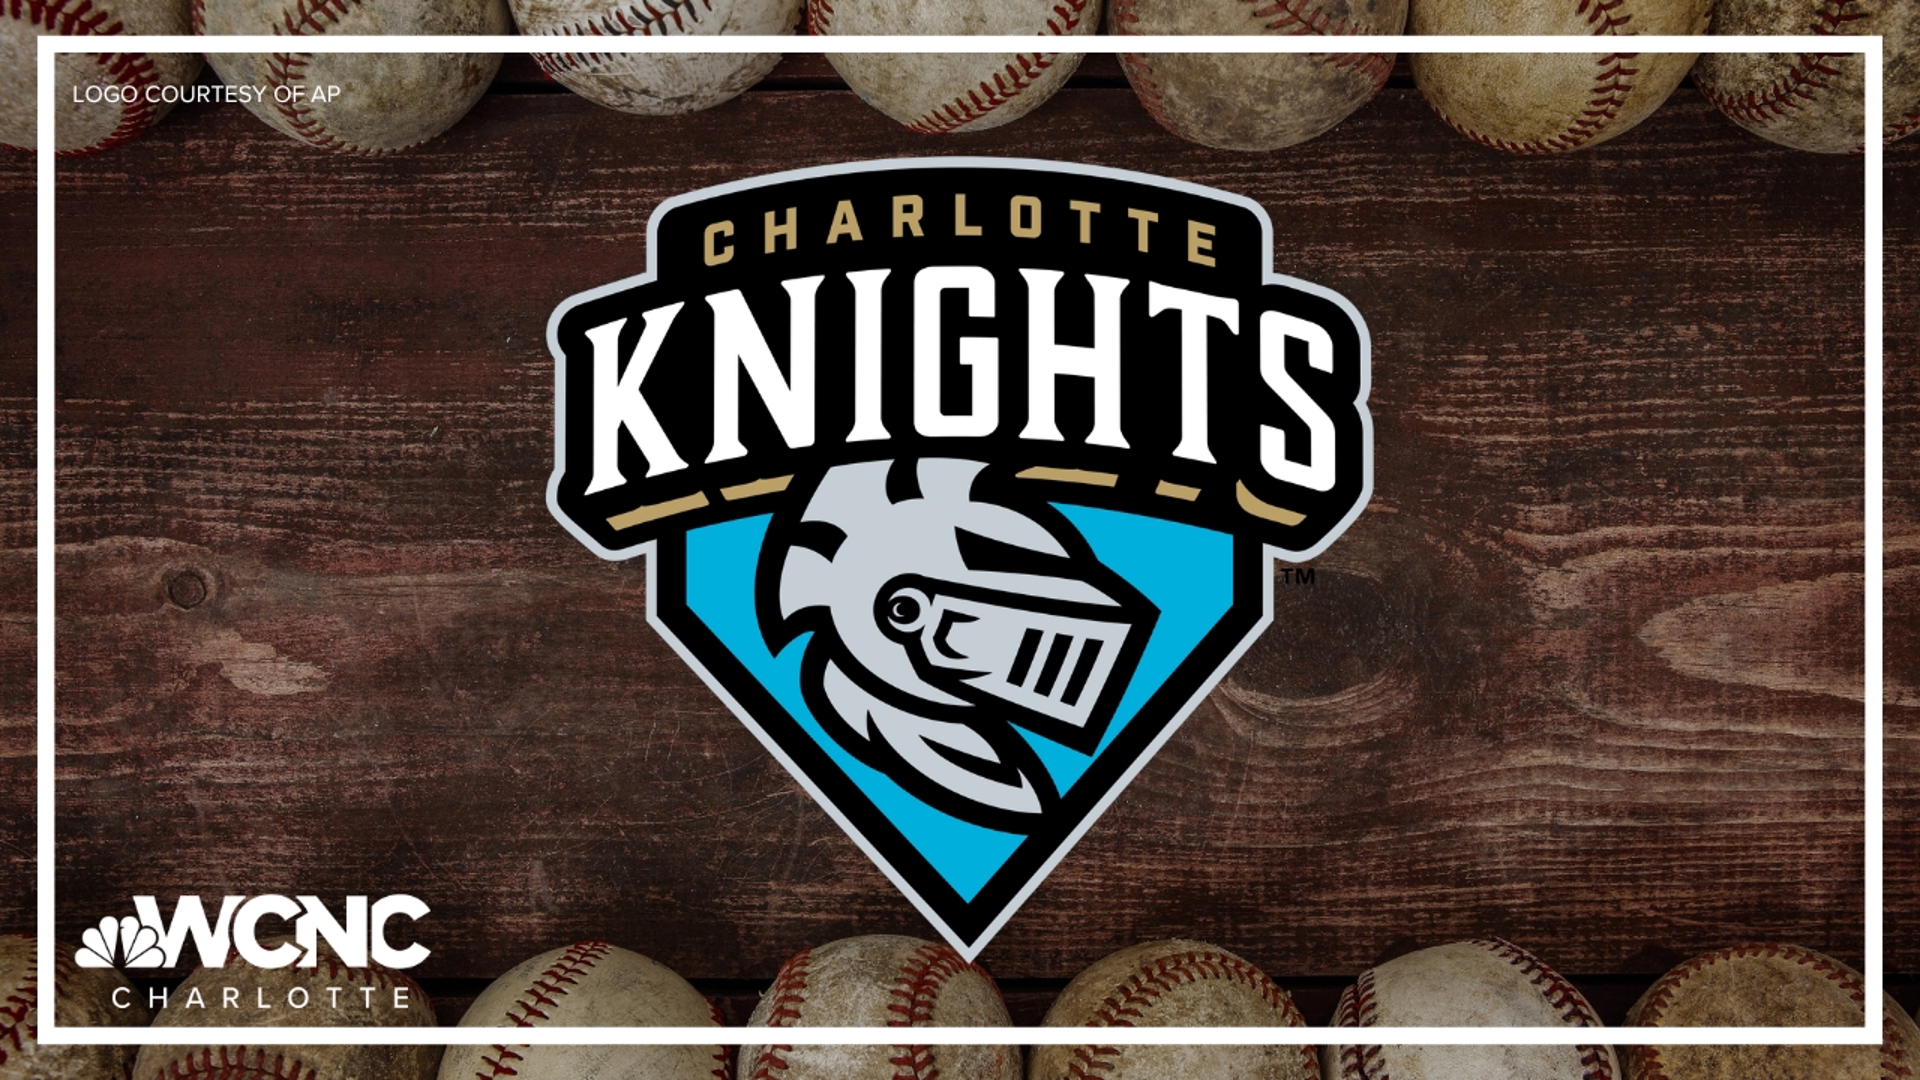 The Knights will be sold to Diamond Baseball Holdings, an organization that owns several minor league teams associated with Charlotte's club.